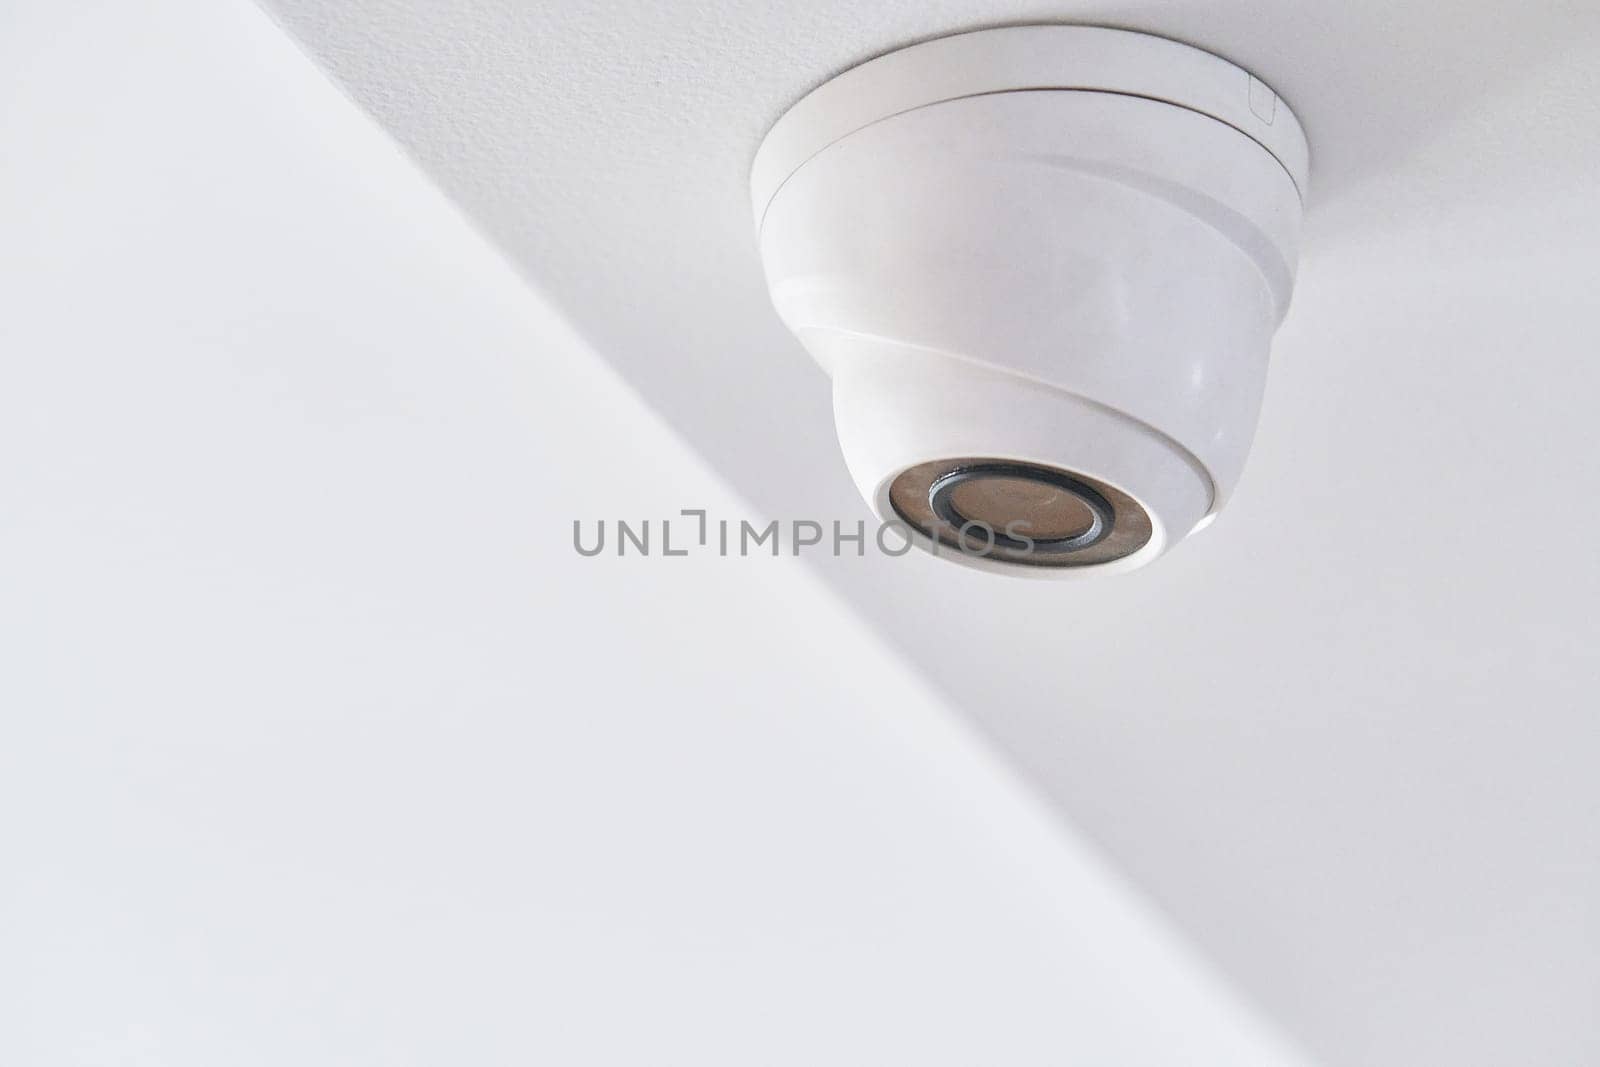 Cctv on white ceiling in modern building by snep_photo